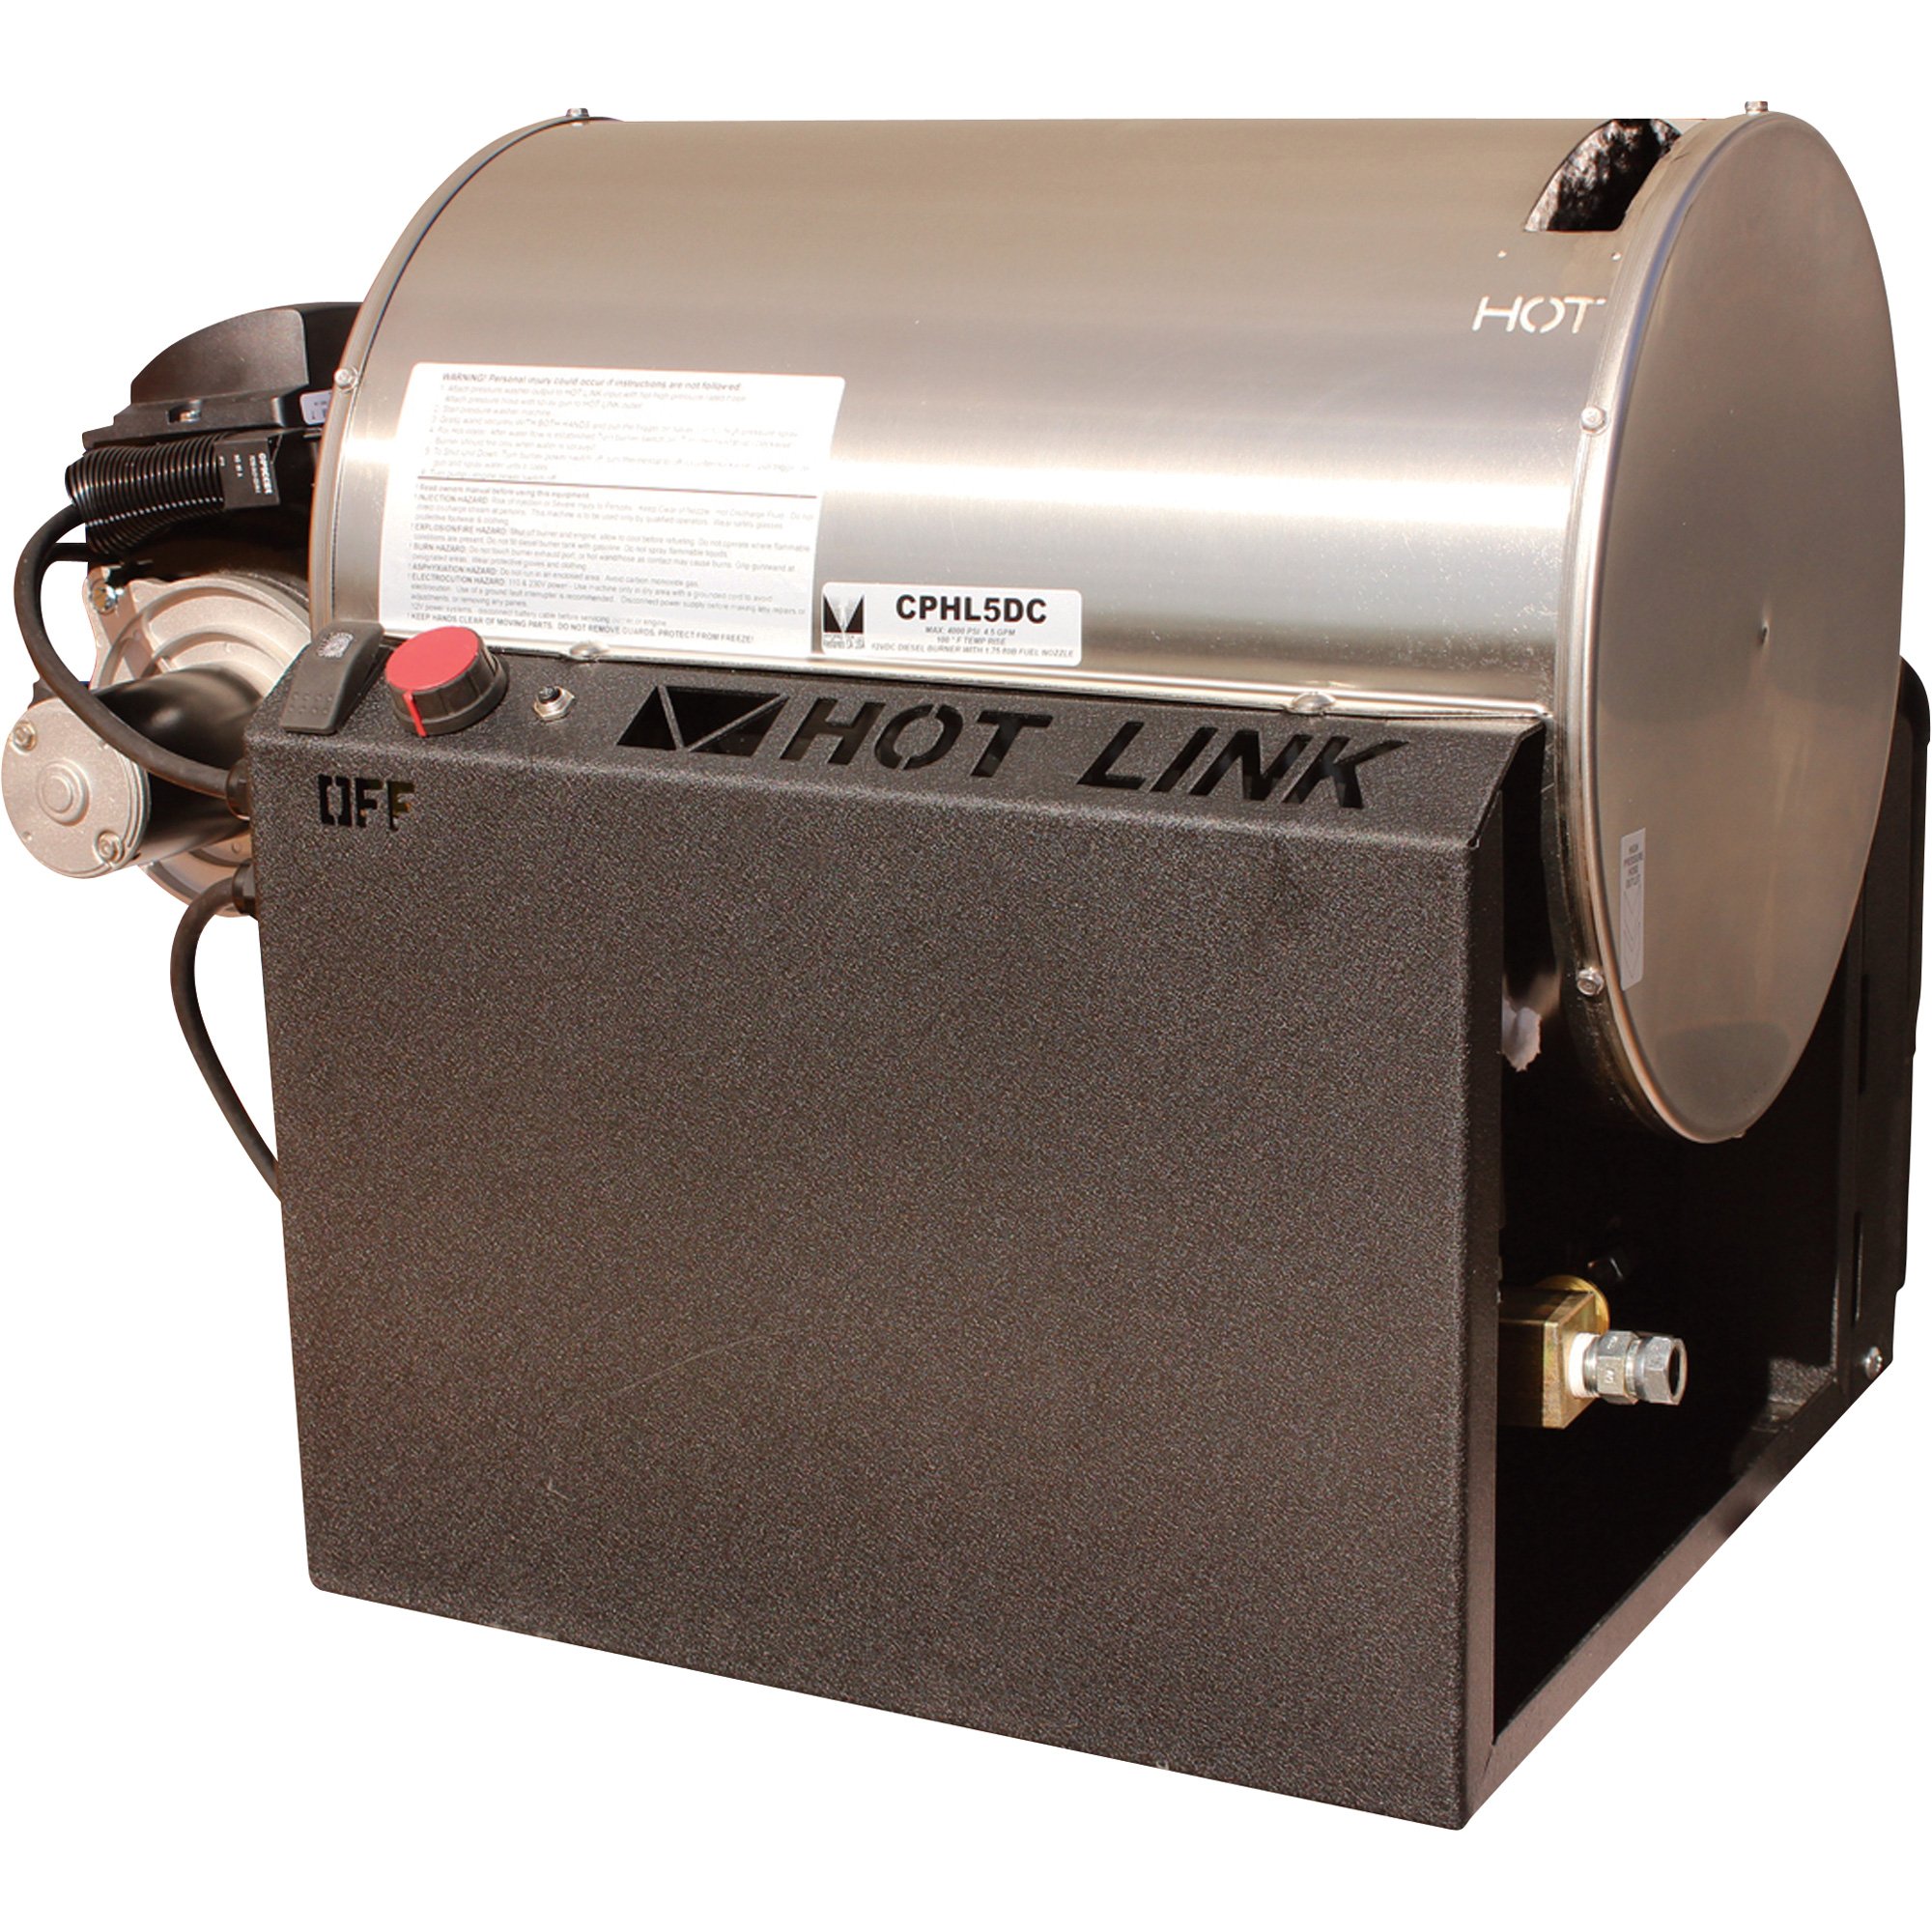 Hot2Go Hot Link 115 Volt Electric Hot Water Heater for Cold Water Pressure  Washers, Model# CPHL5E1H